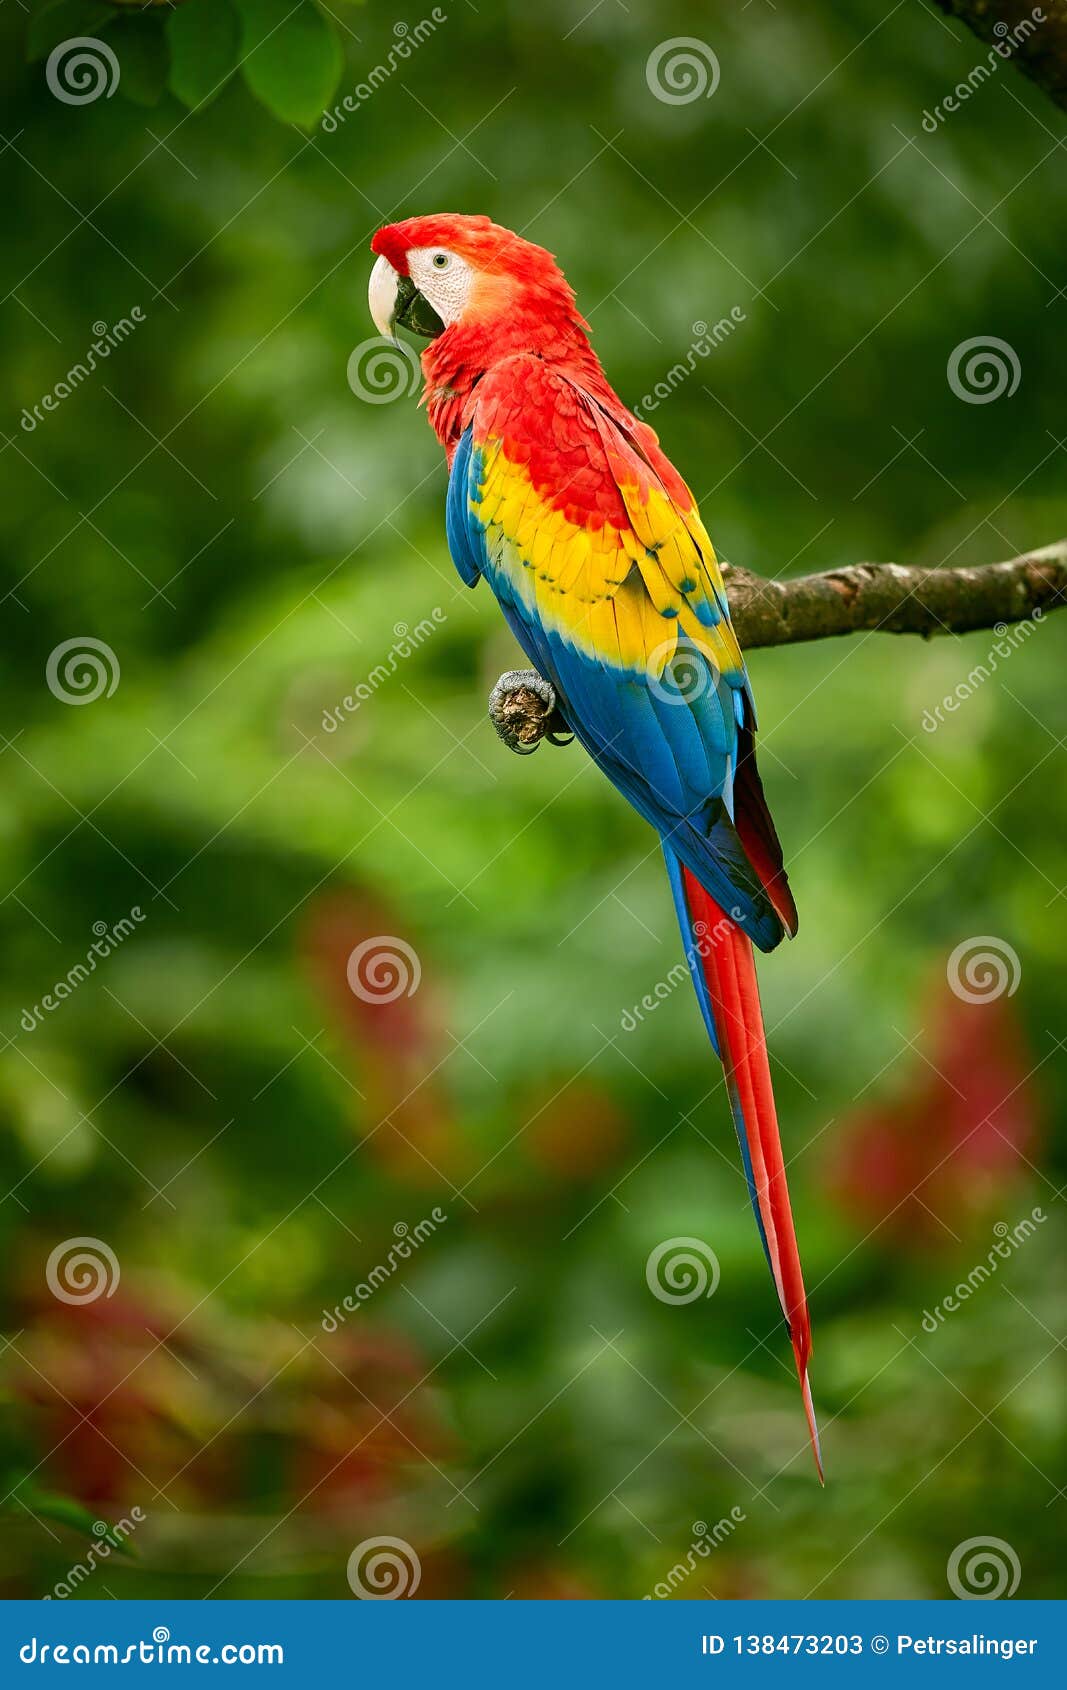 Red Parrot Macaw Parrot Scarlet Macaw, Ara in Tropical Forest, Costa Rica. Stock Image - Image of macaws: 138473203